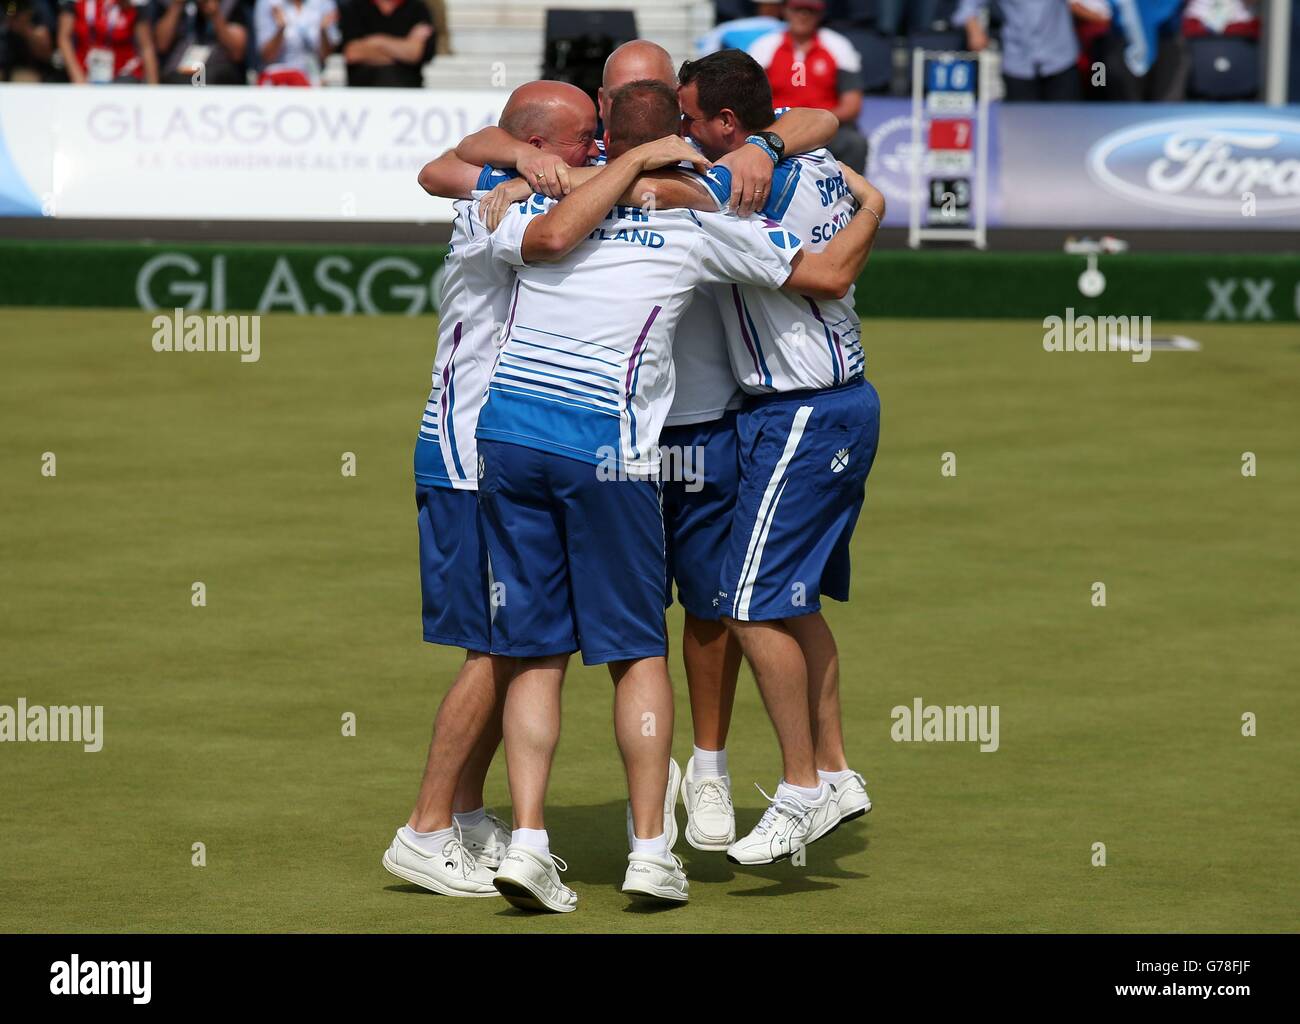 Scotland's Alex Marshall,Paul Foster, Neil Speirs and David Peacock hug after winning against England in the Men's Fours final at Kelvingrove Lawn Bowls Centre, during the 2014 Commonwealth Games in Glasgow. Stock Photo